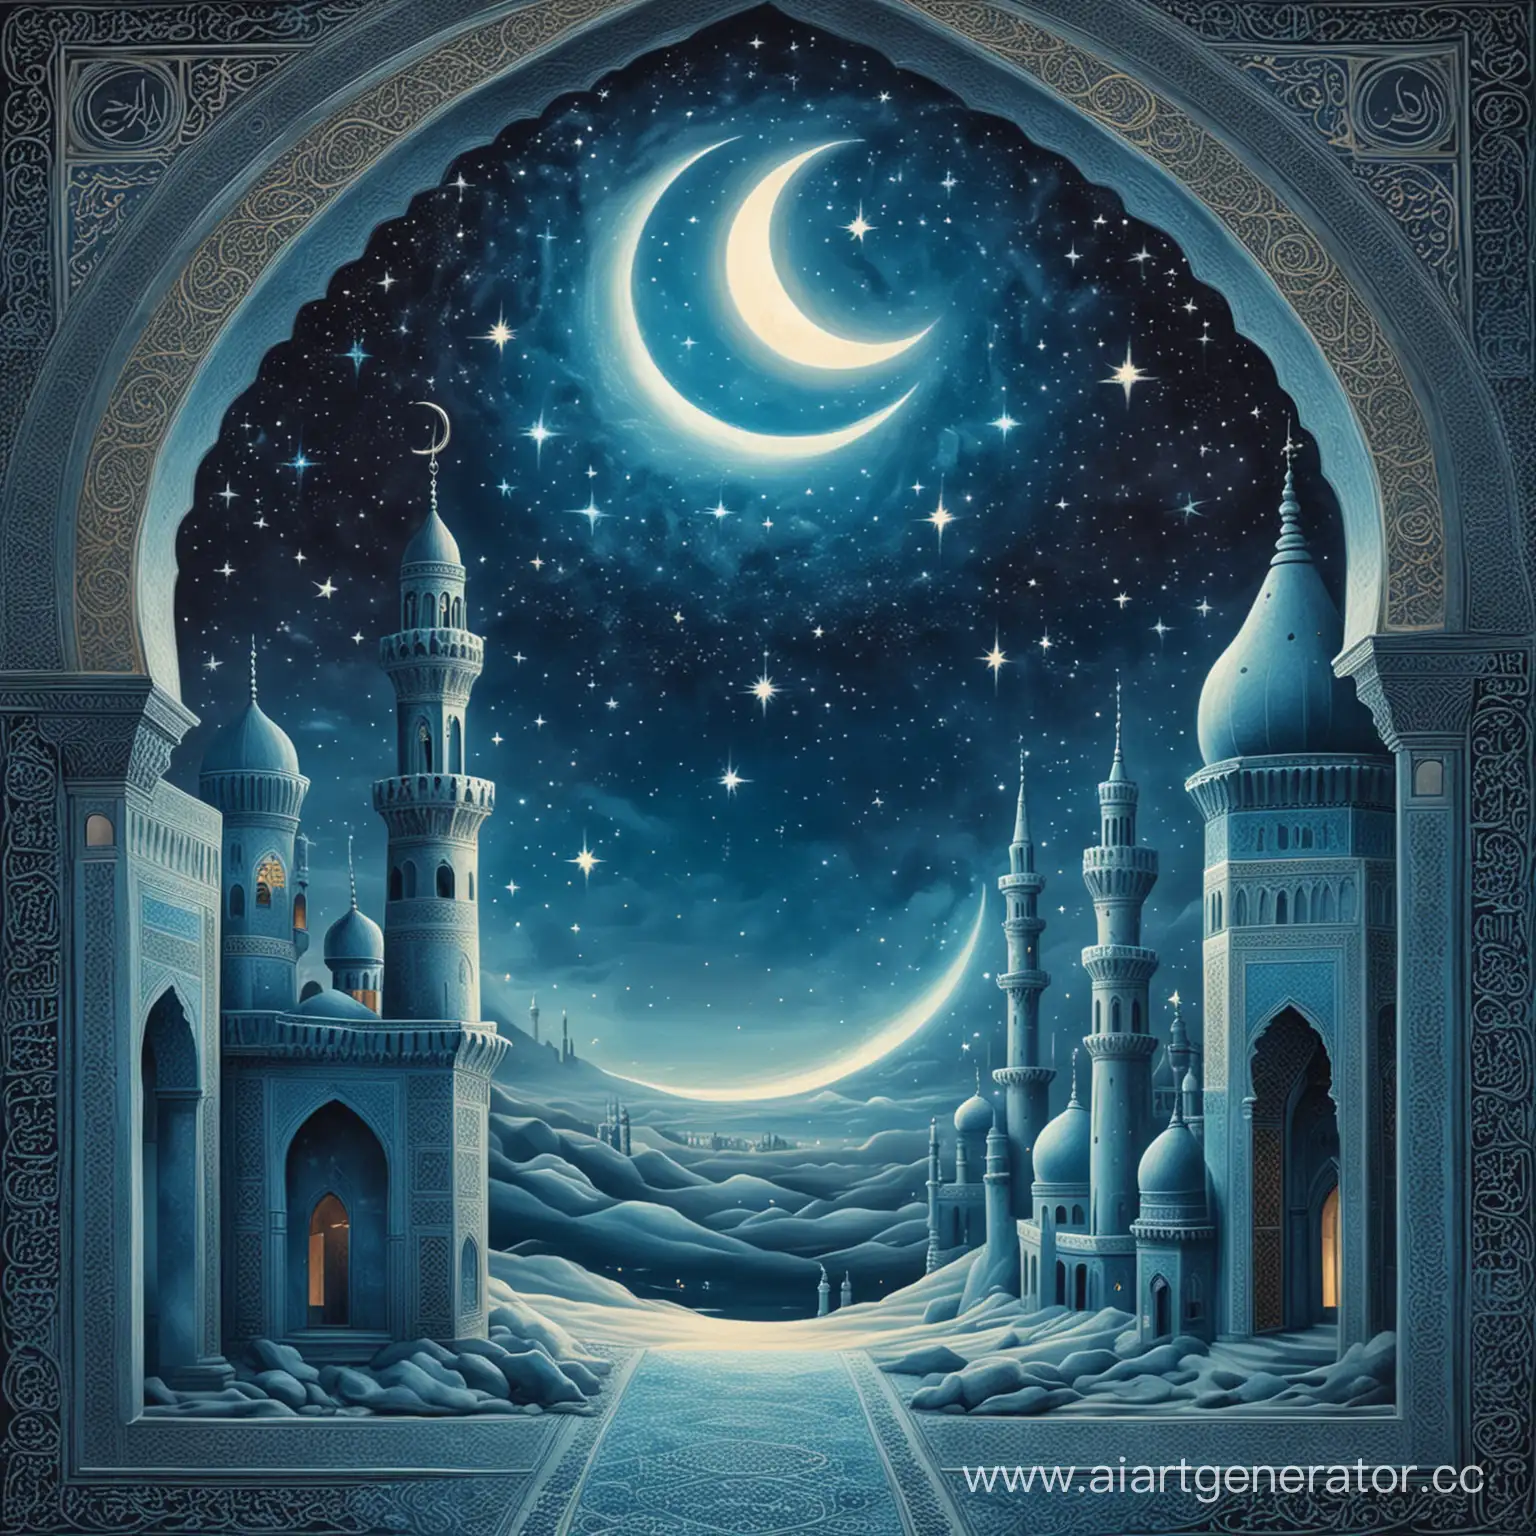 Ramadan-Crescent-Moon-and-Mosque-Night-Scene-in-Blue-Hues